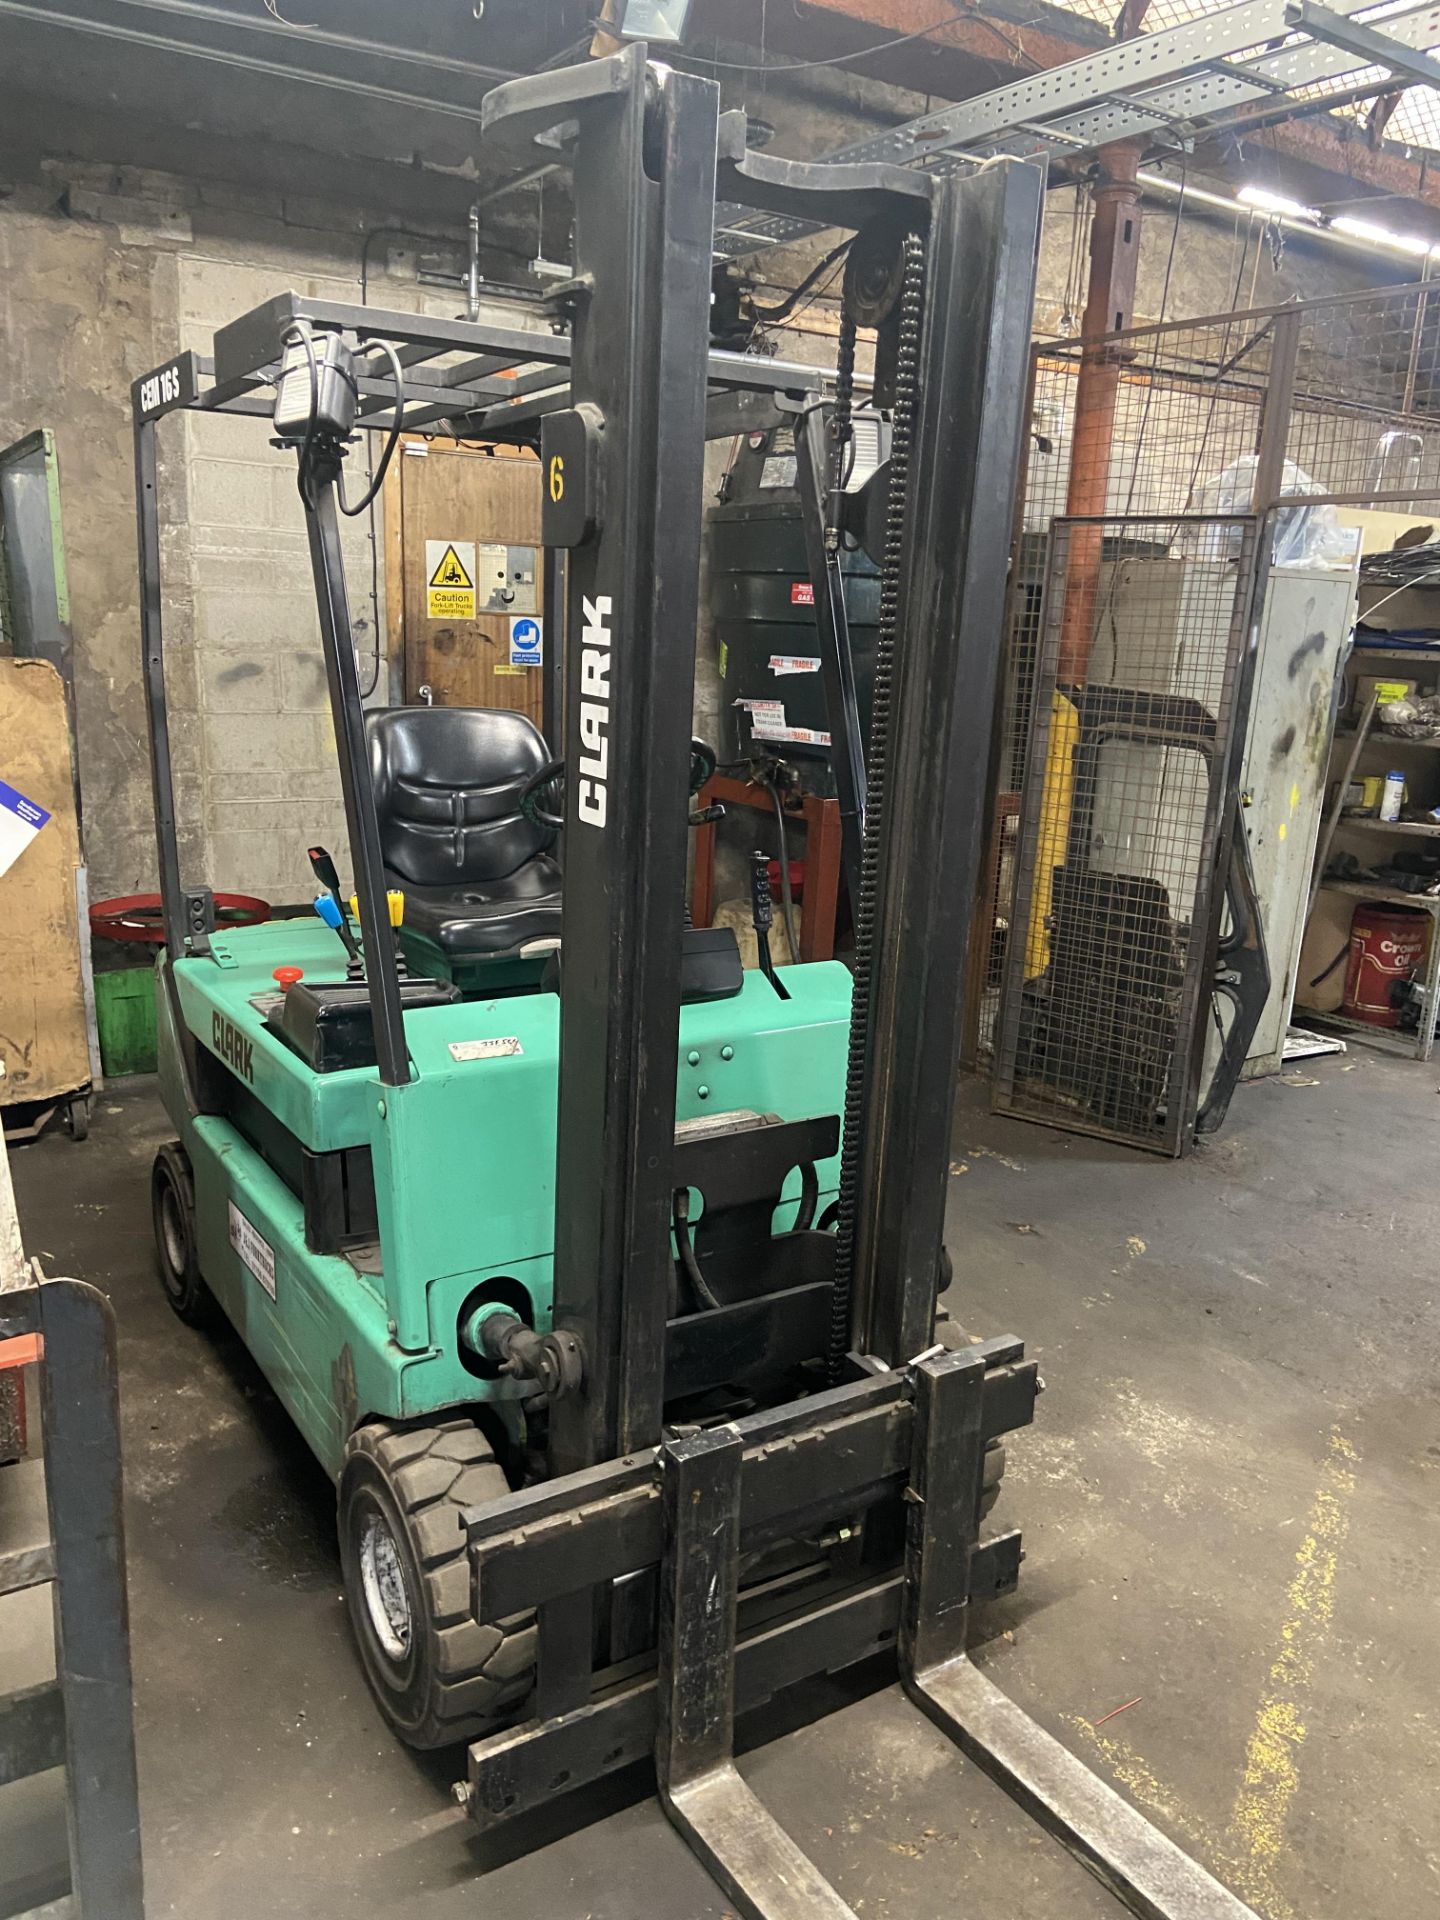 Clarke CEM 16 S 1600kg cap. Electric Fork Lift Truck, serial no. CEM145 1500 GEF 7102, year of - Image 3 of 9